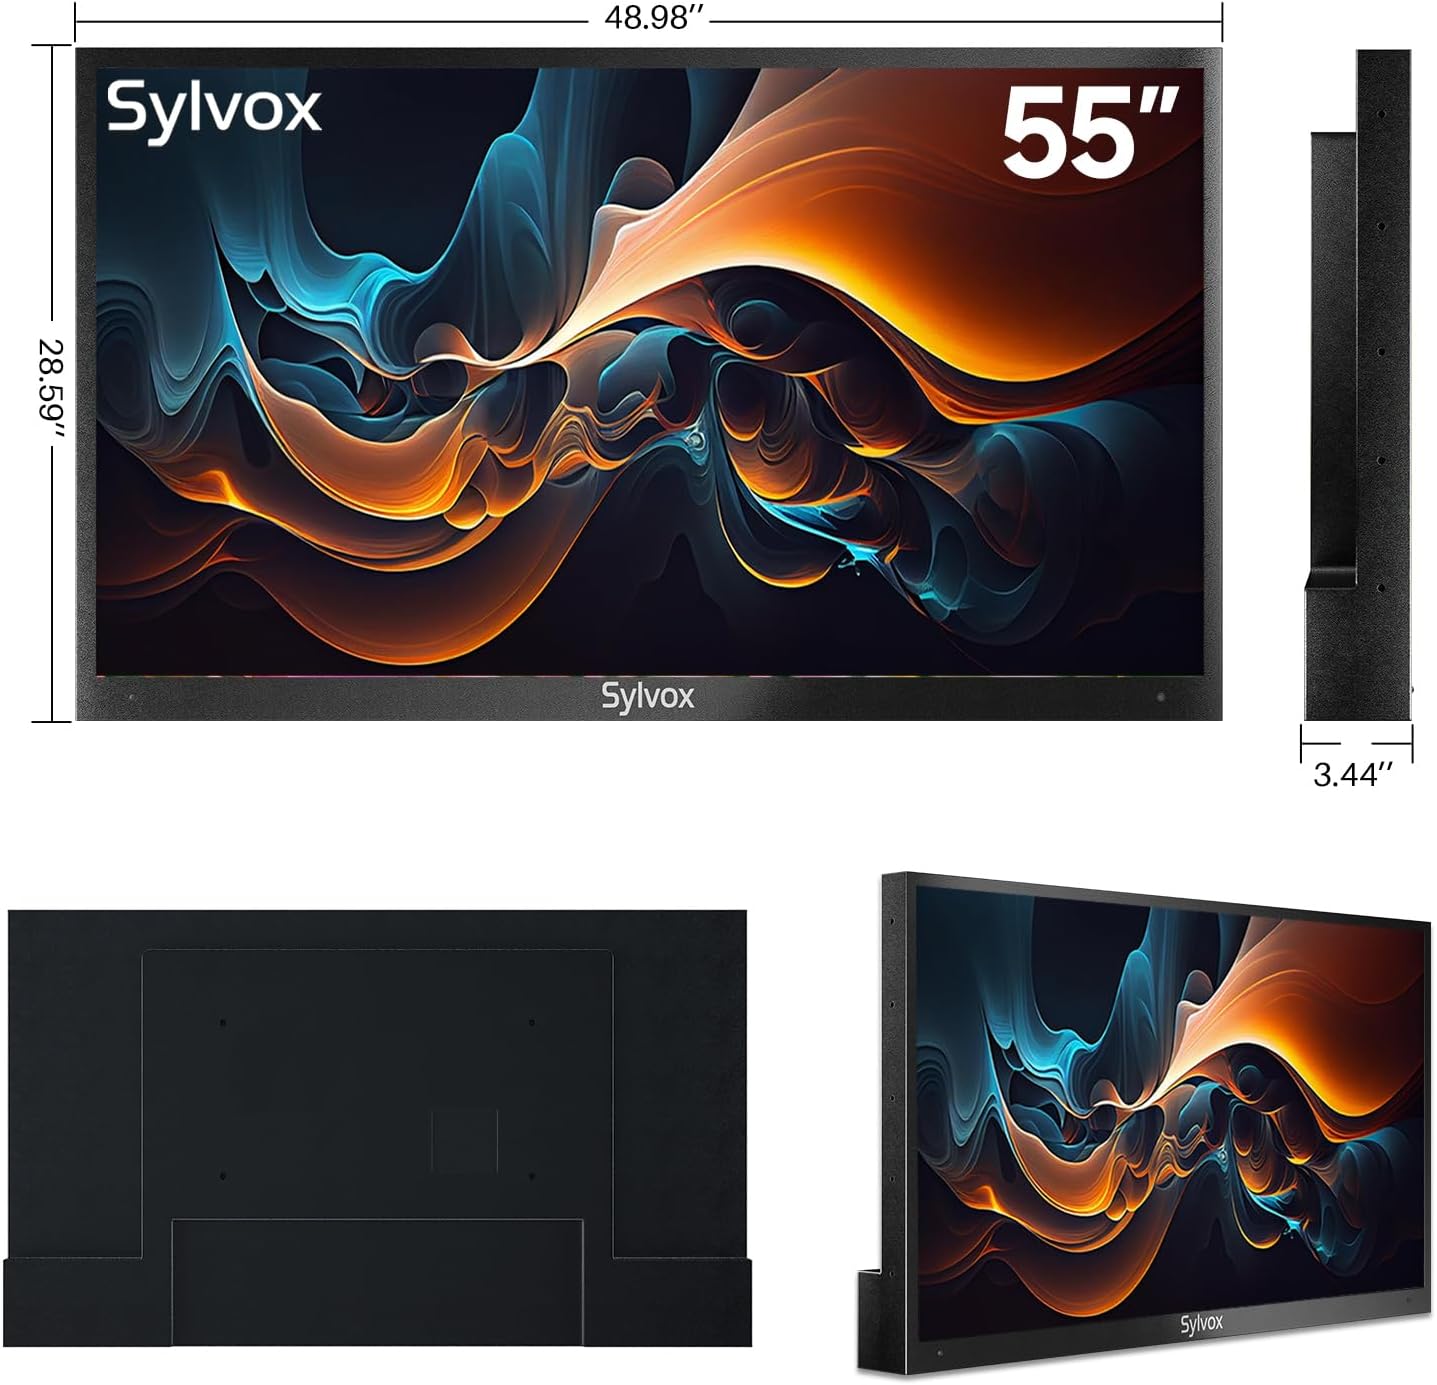 SYLVOX 55 inch Outdoor TV, 4K UHD Android Smart TV 1000Nit for Partial Sun, IP55 Waterproof Outside TV Chromecast Built - in, Voice Assistant, Bluetooth, WiFi, 3 HDMI Input (Deck Pro Series) - Amazing Gadgets Outlet